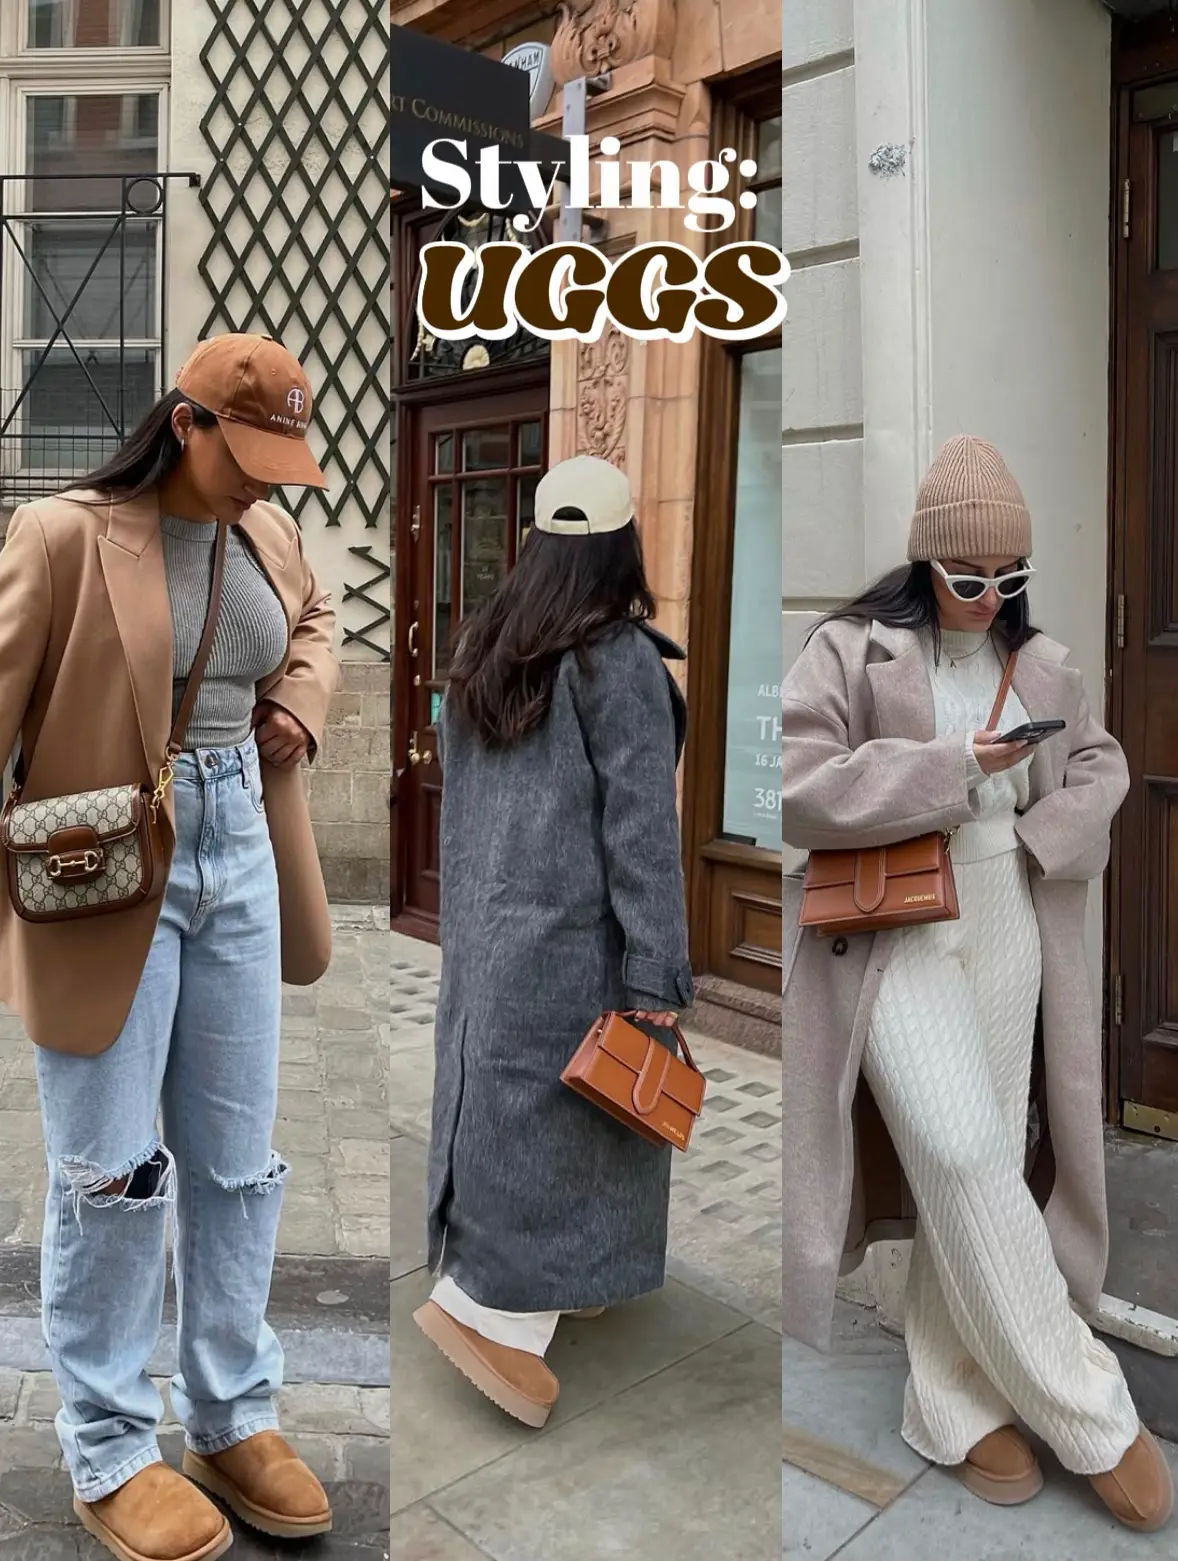 15 Louis Vuitton and Uggs ideas